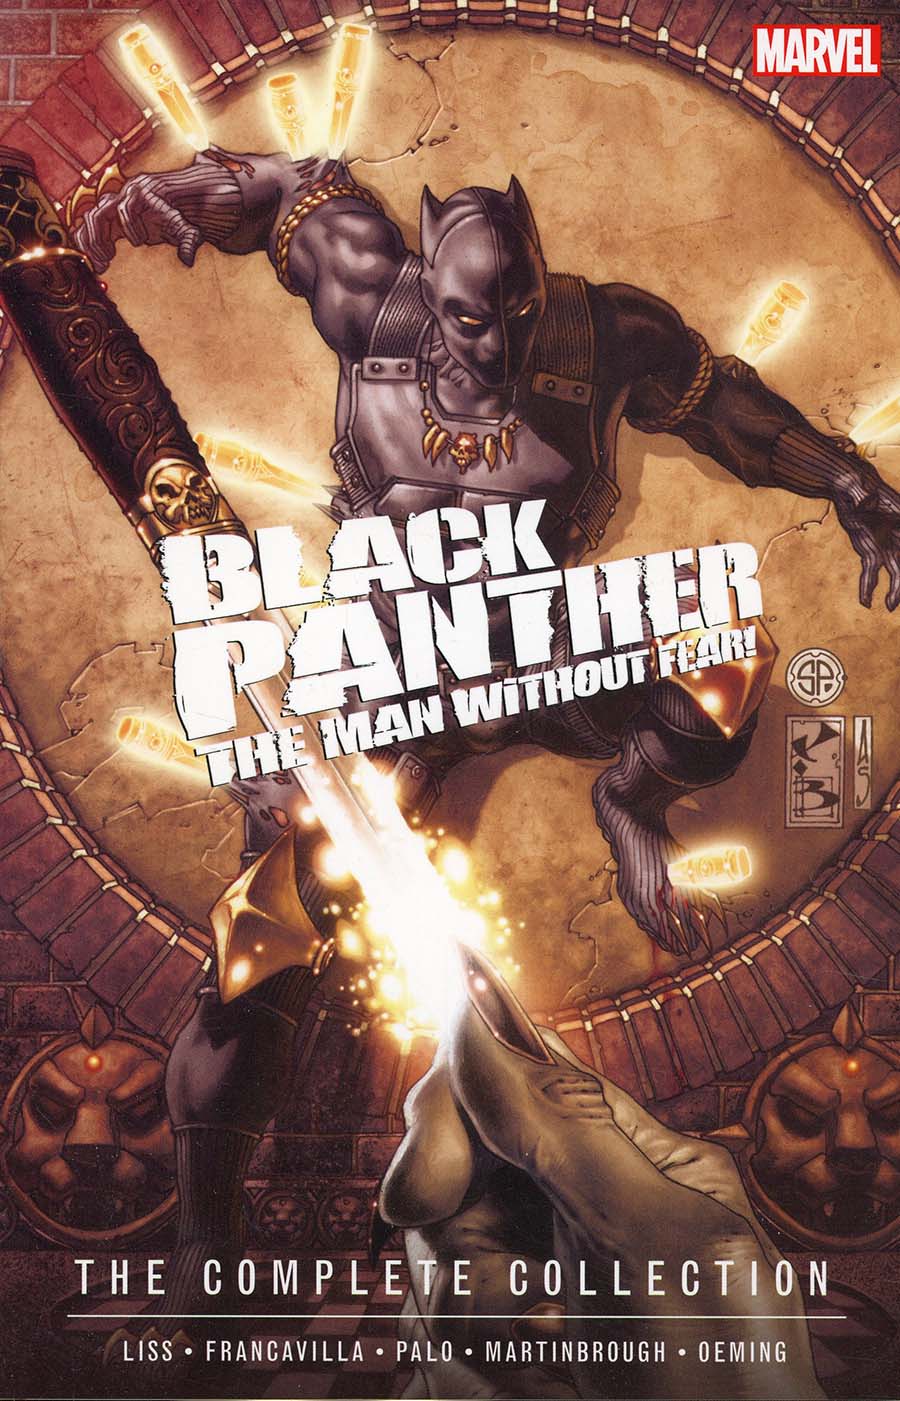 Black Panther The Man Without Fear Complete Collection TP